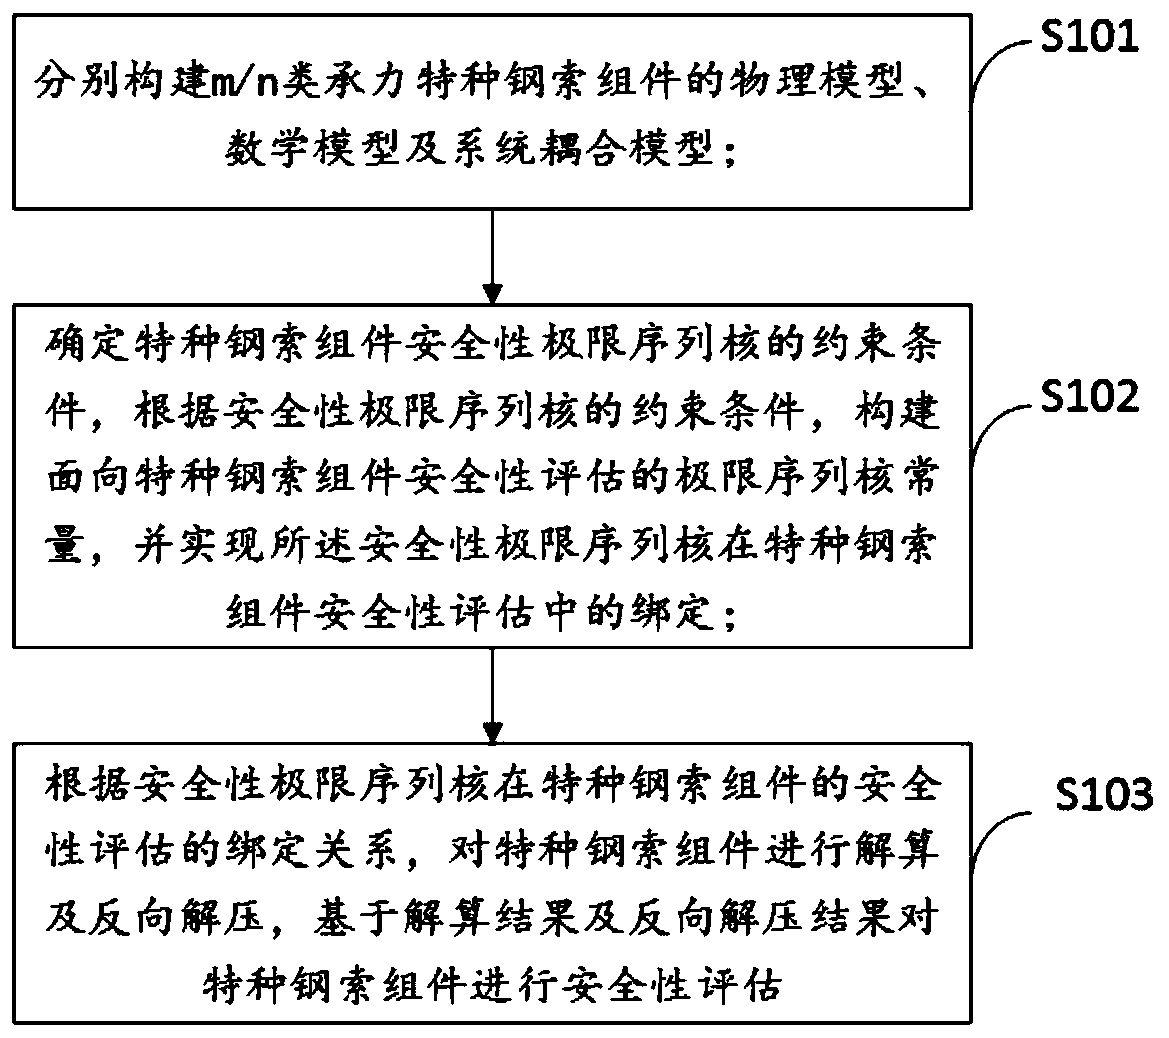 Safety estimation method for an industrial special steel cable assembly